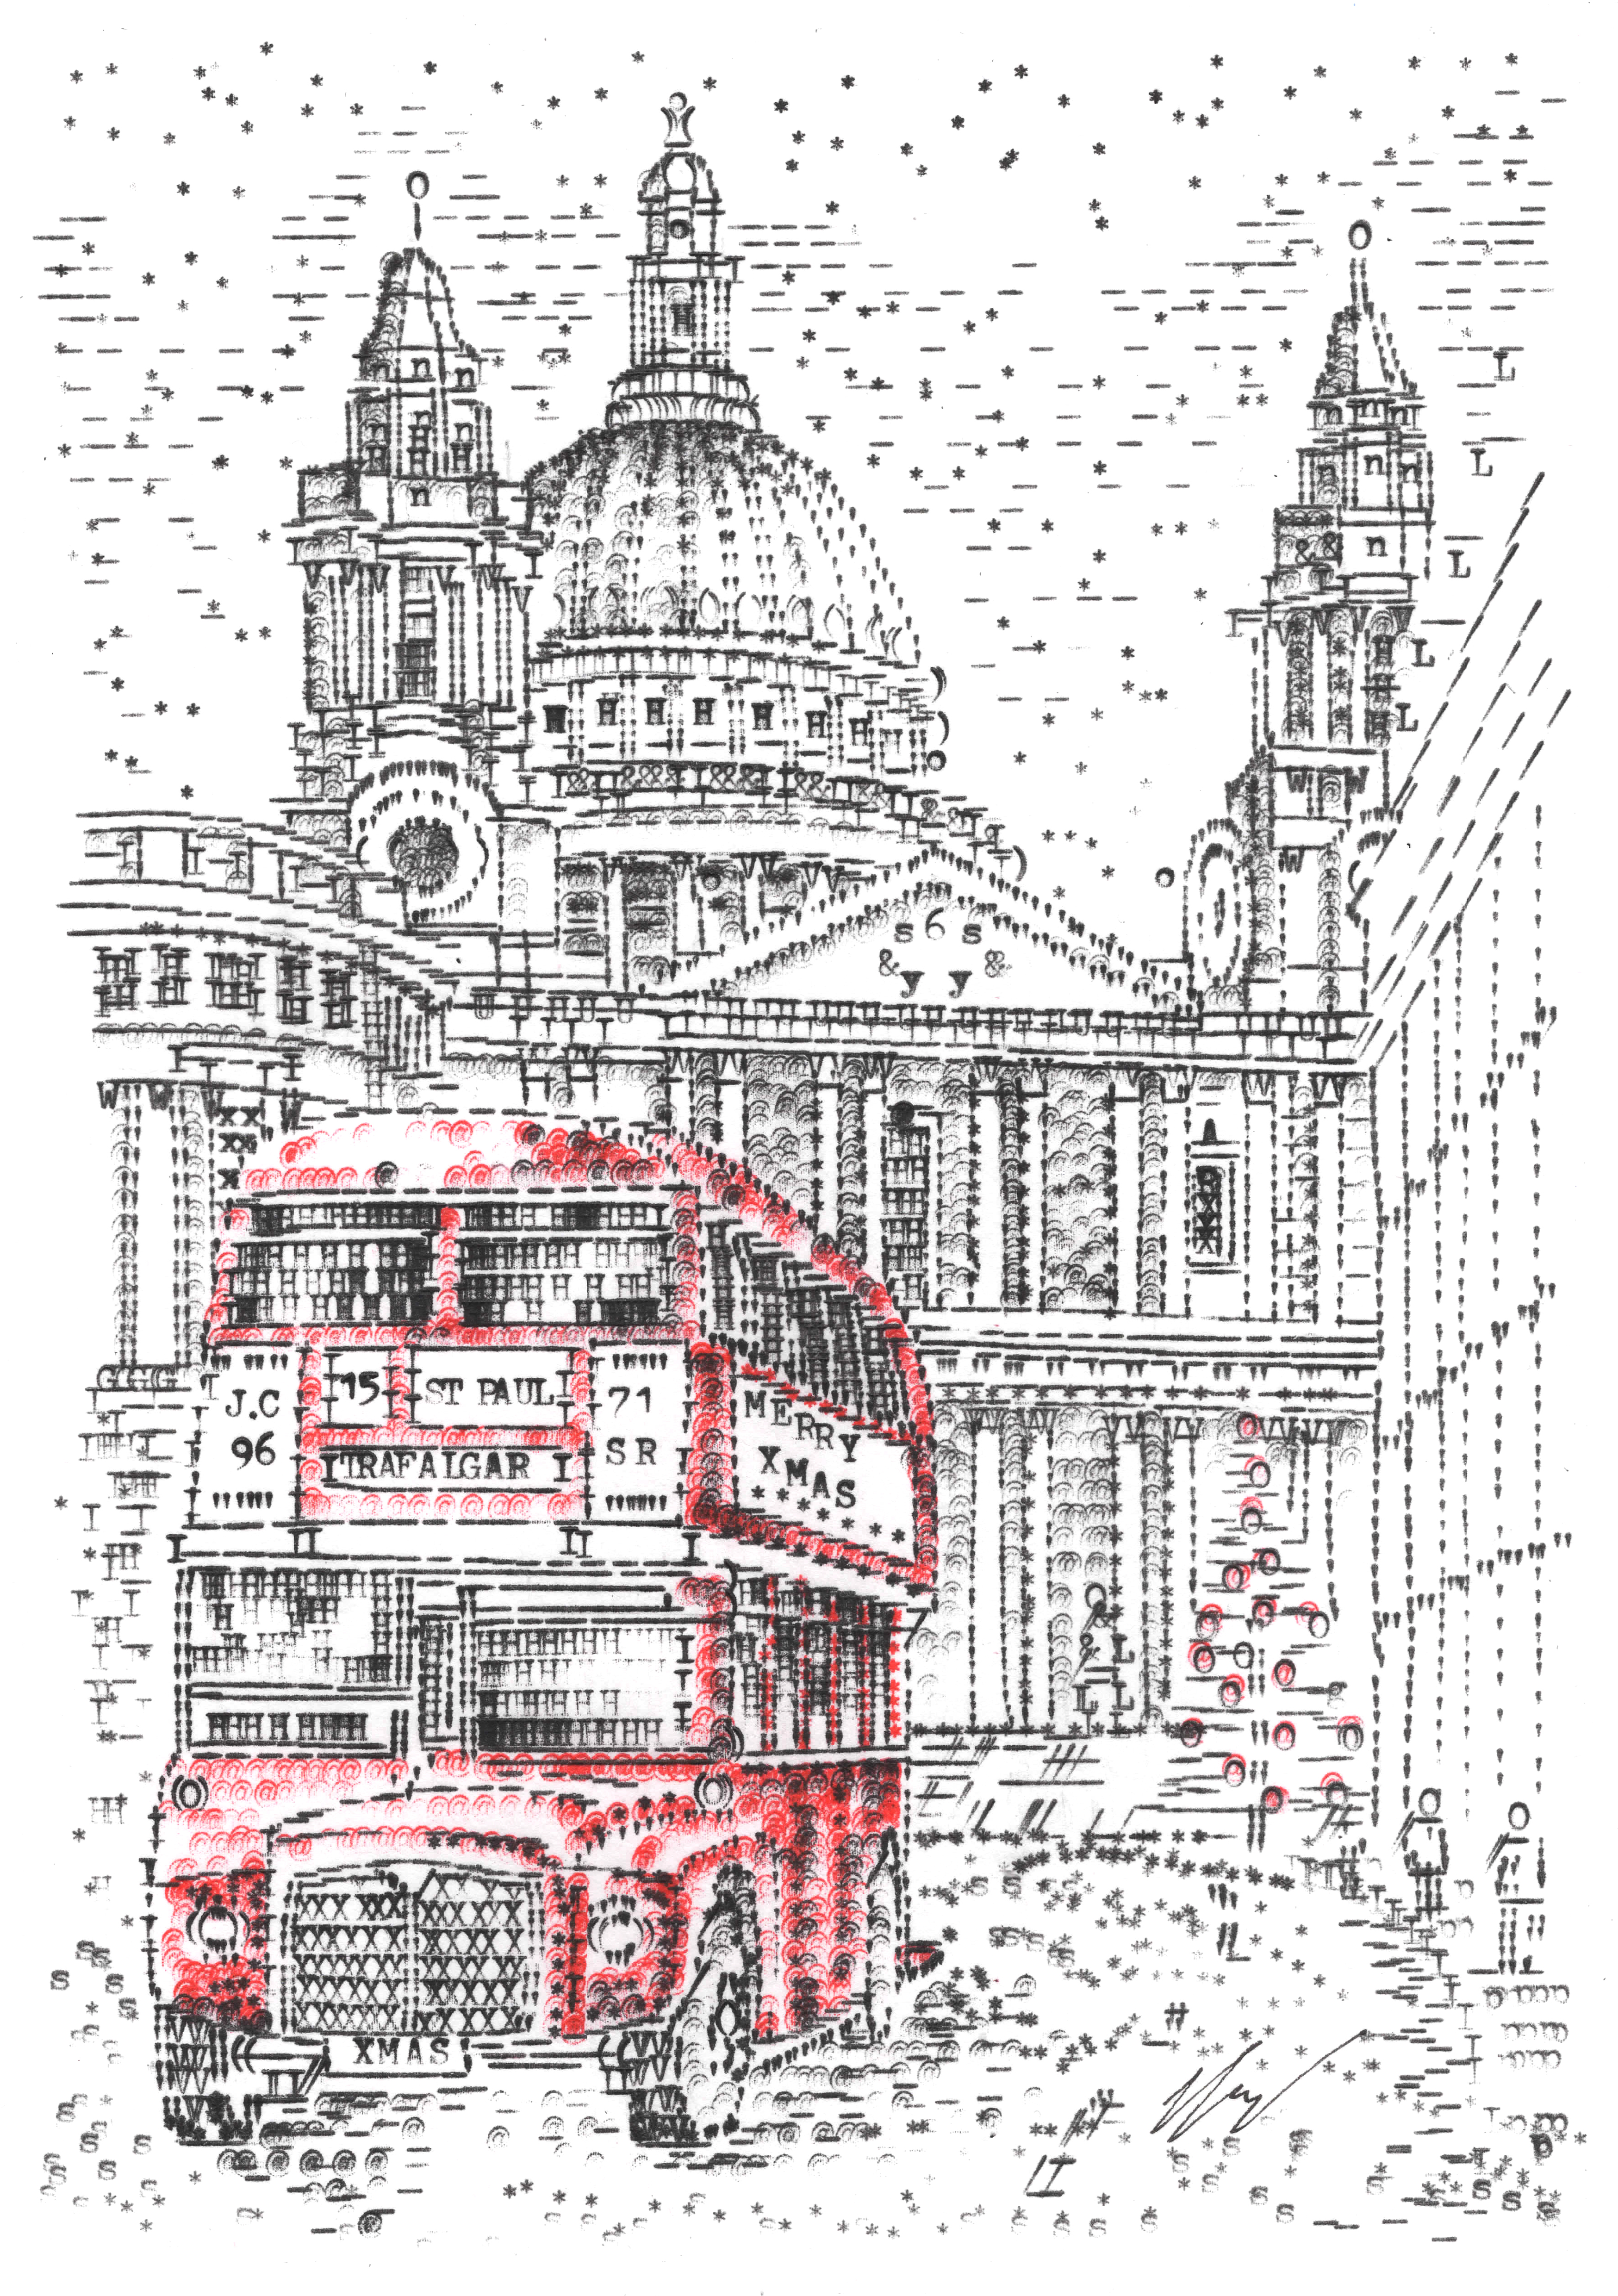 A Christmas card design created by James Cook. It has an image of a red London bus, with St Paul's Cathedral in the background.